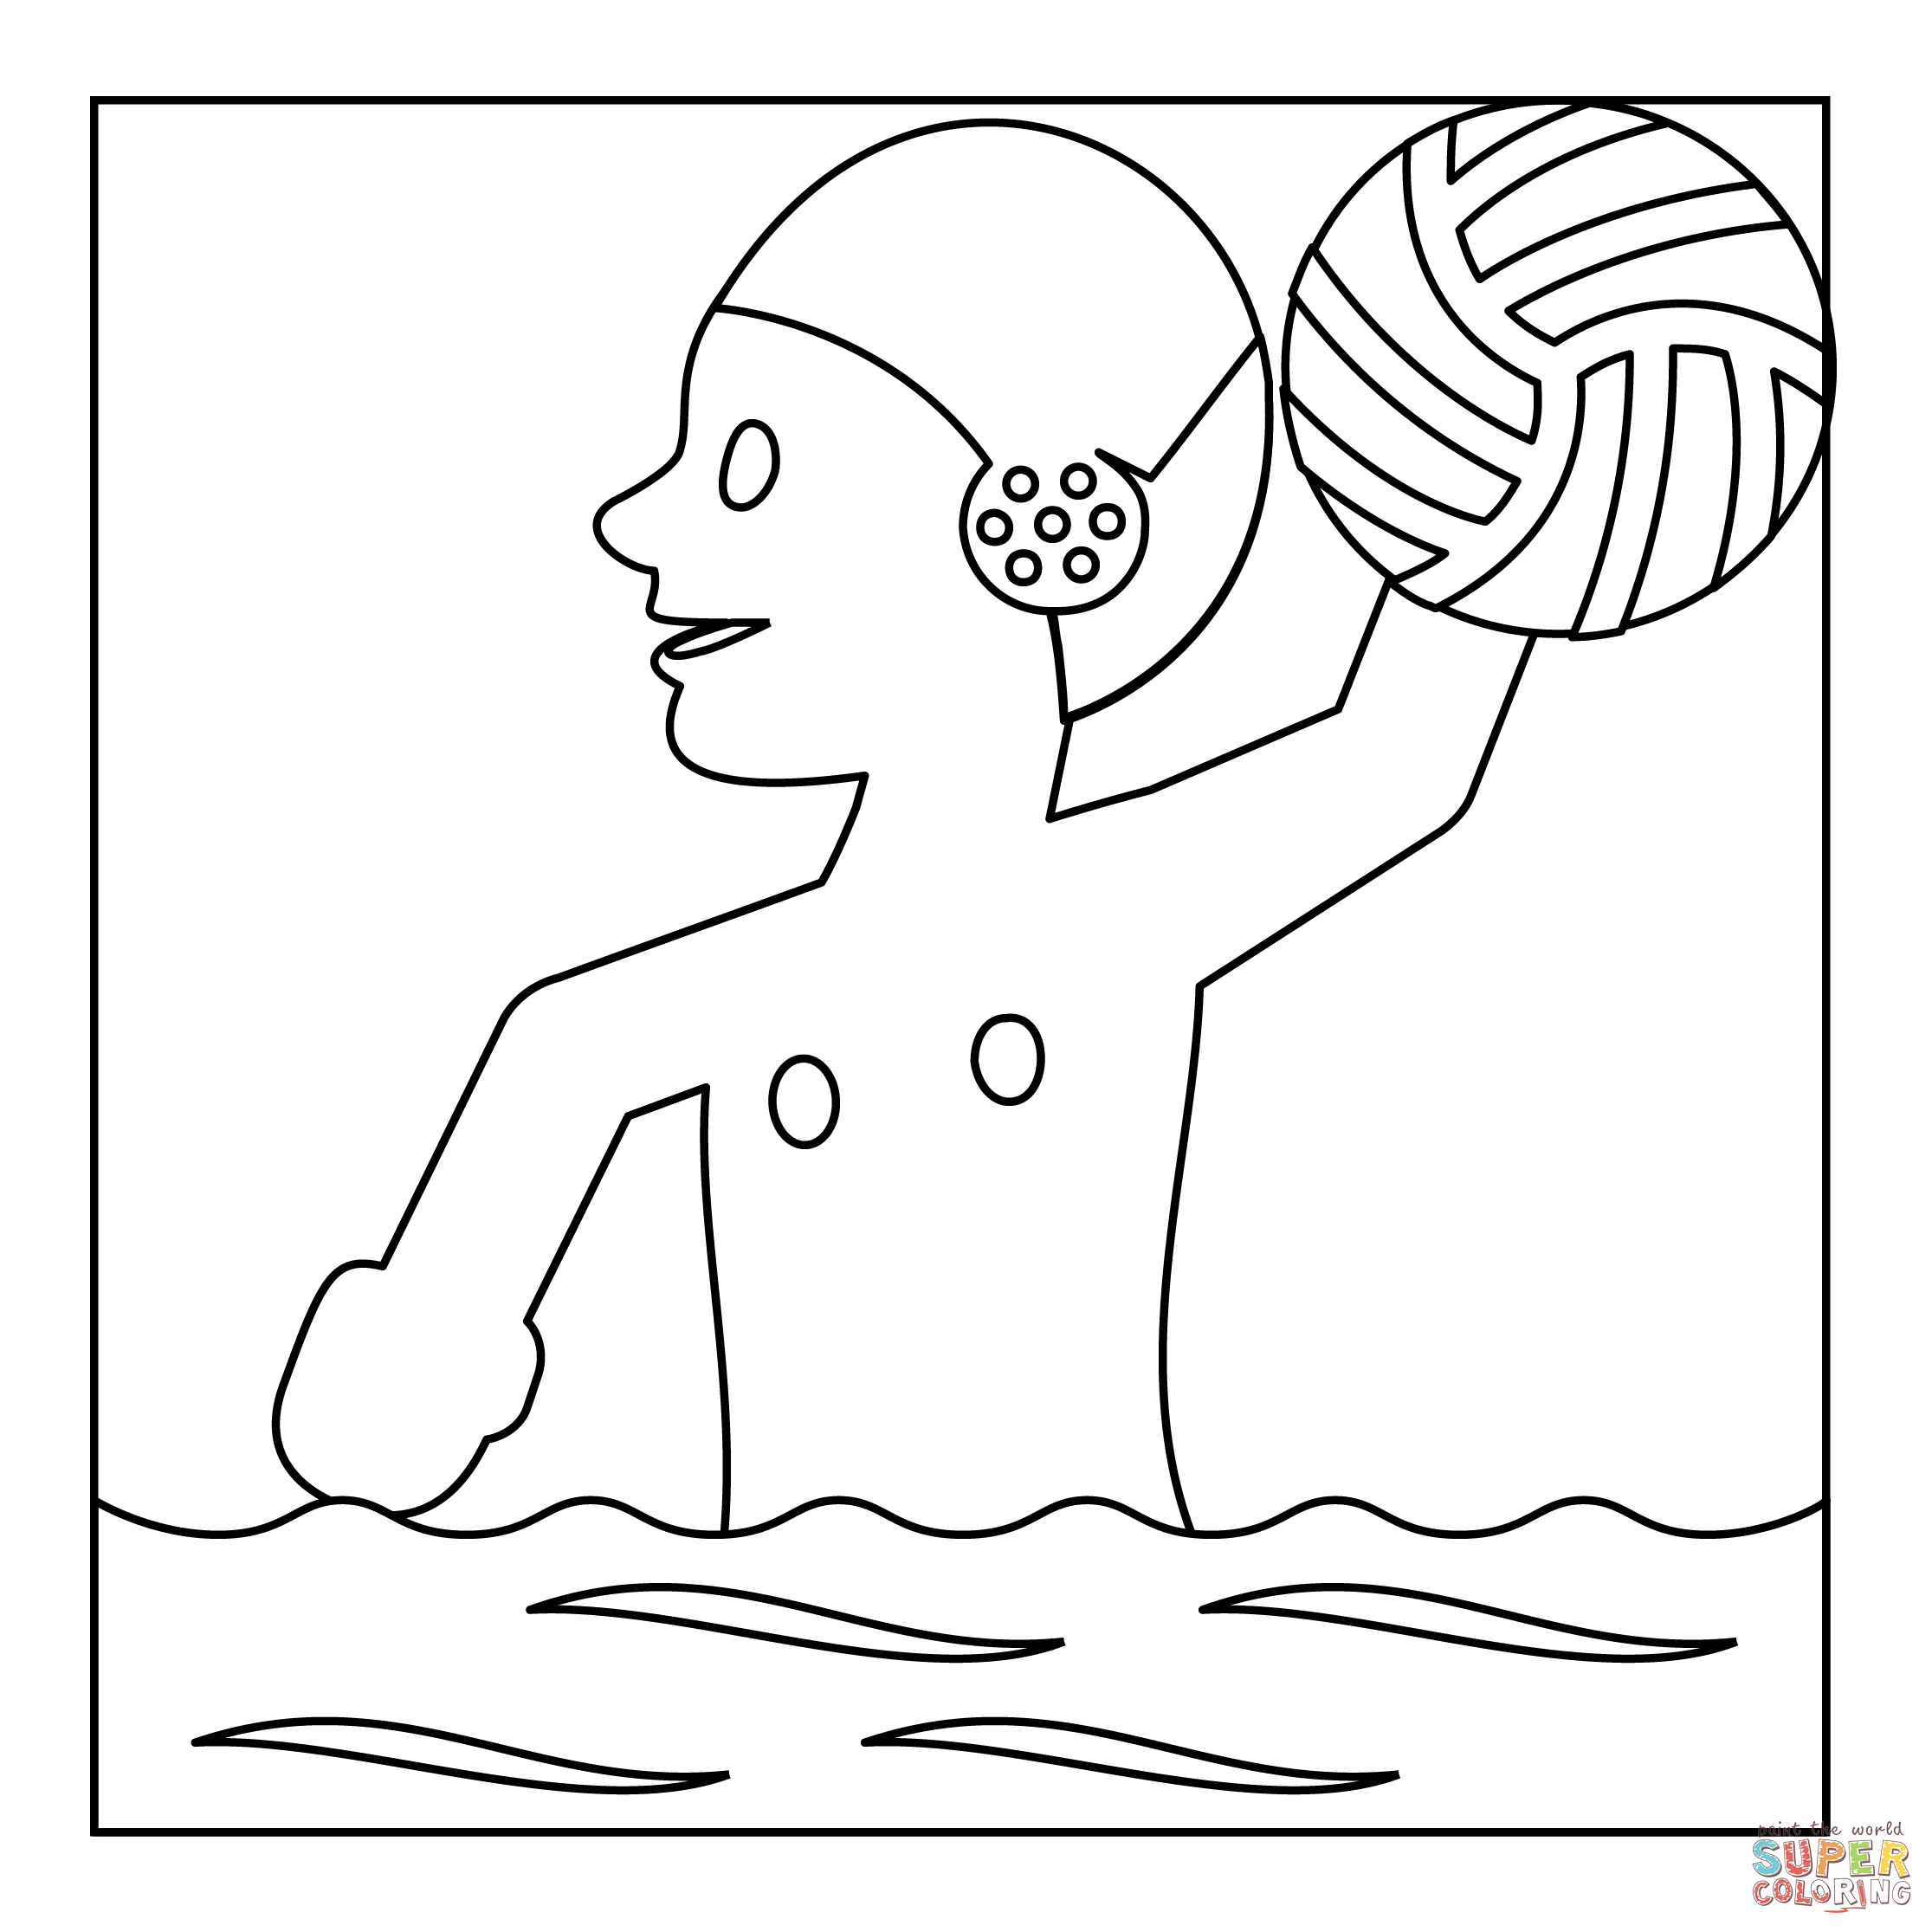 Person playing water polo coloring page free printable coloring pages